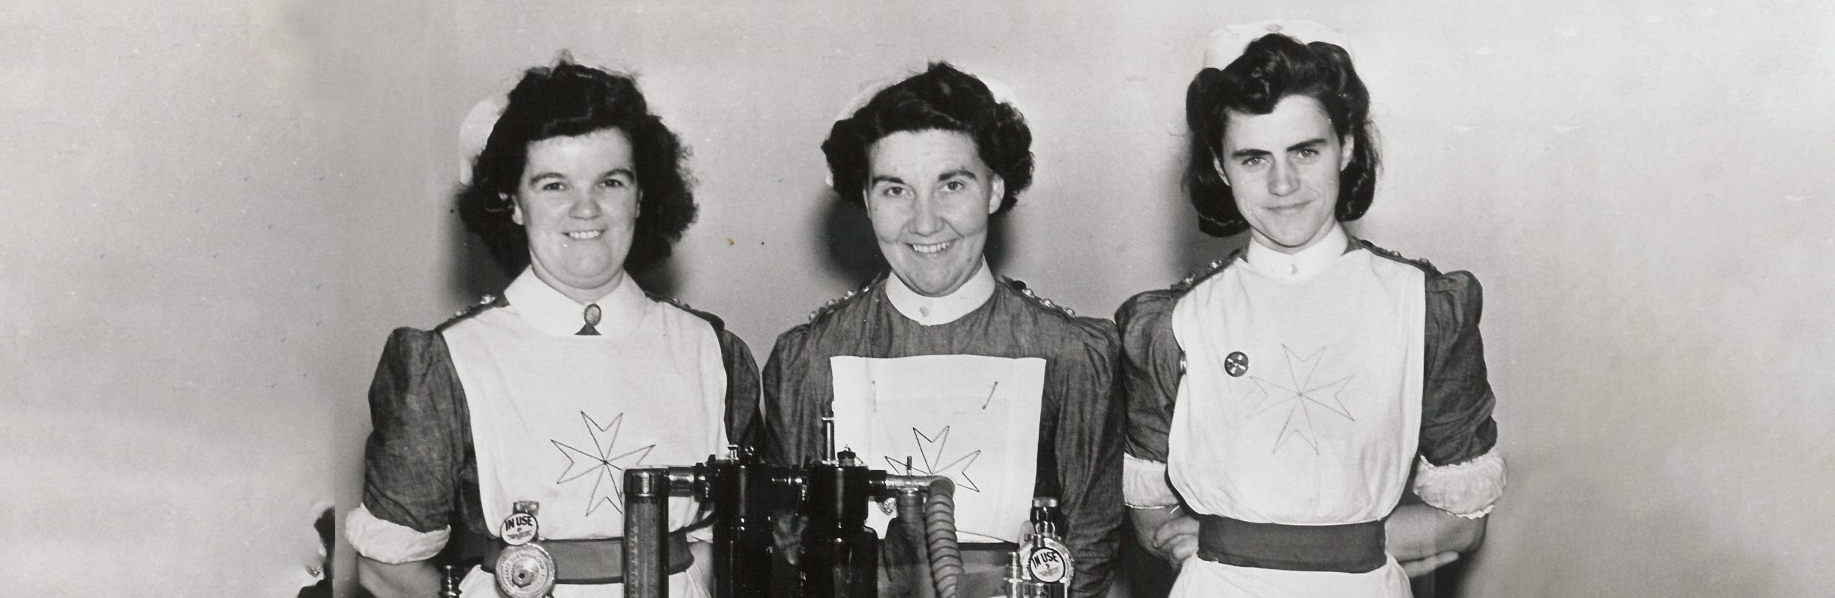 A black and white photograph of three women wearing nurses' uniforms